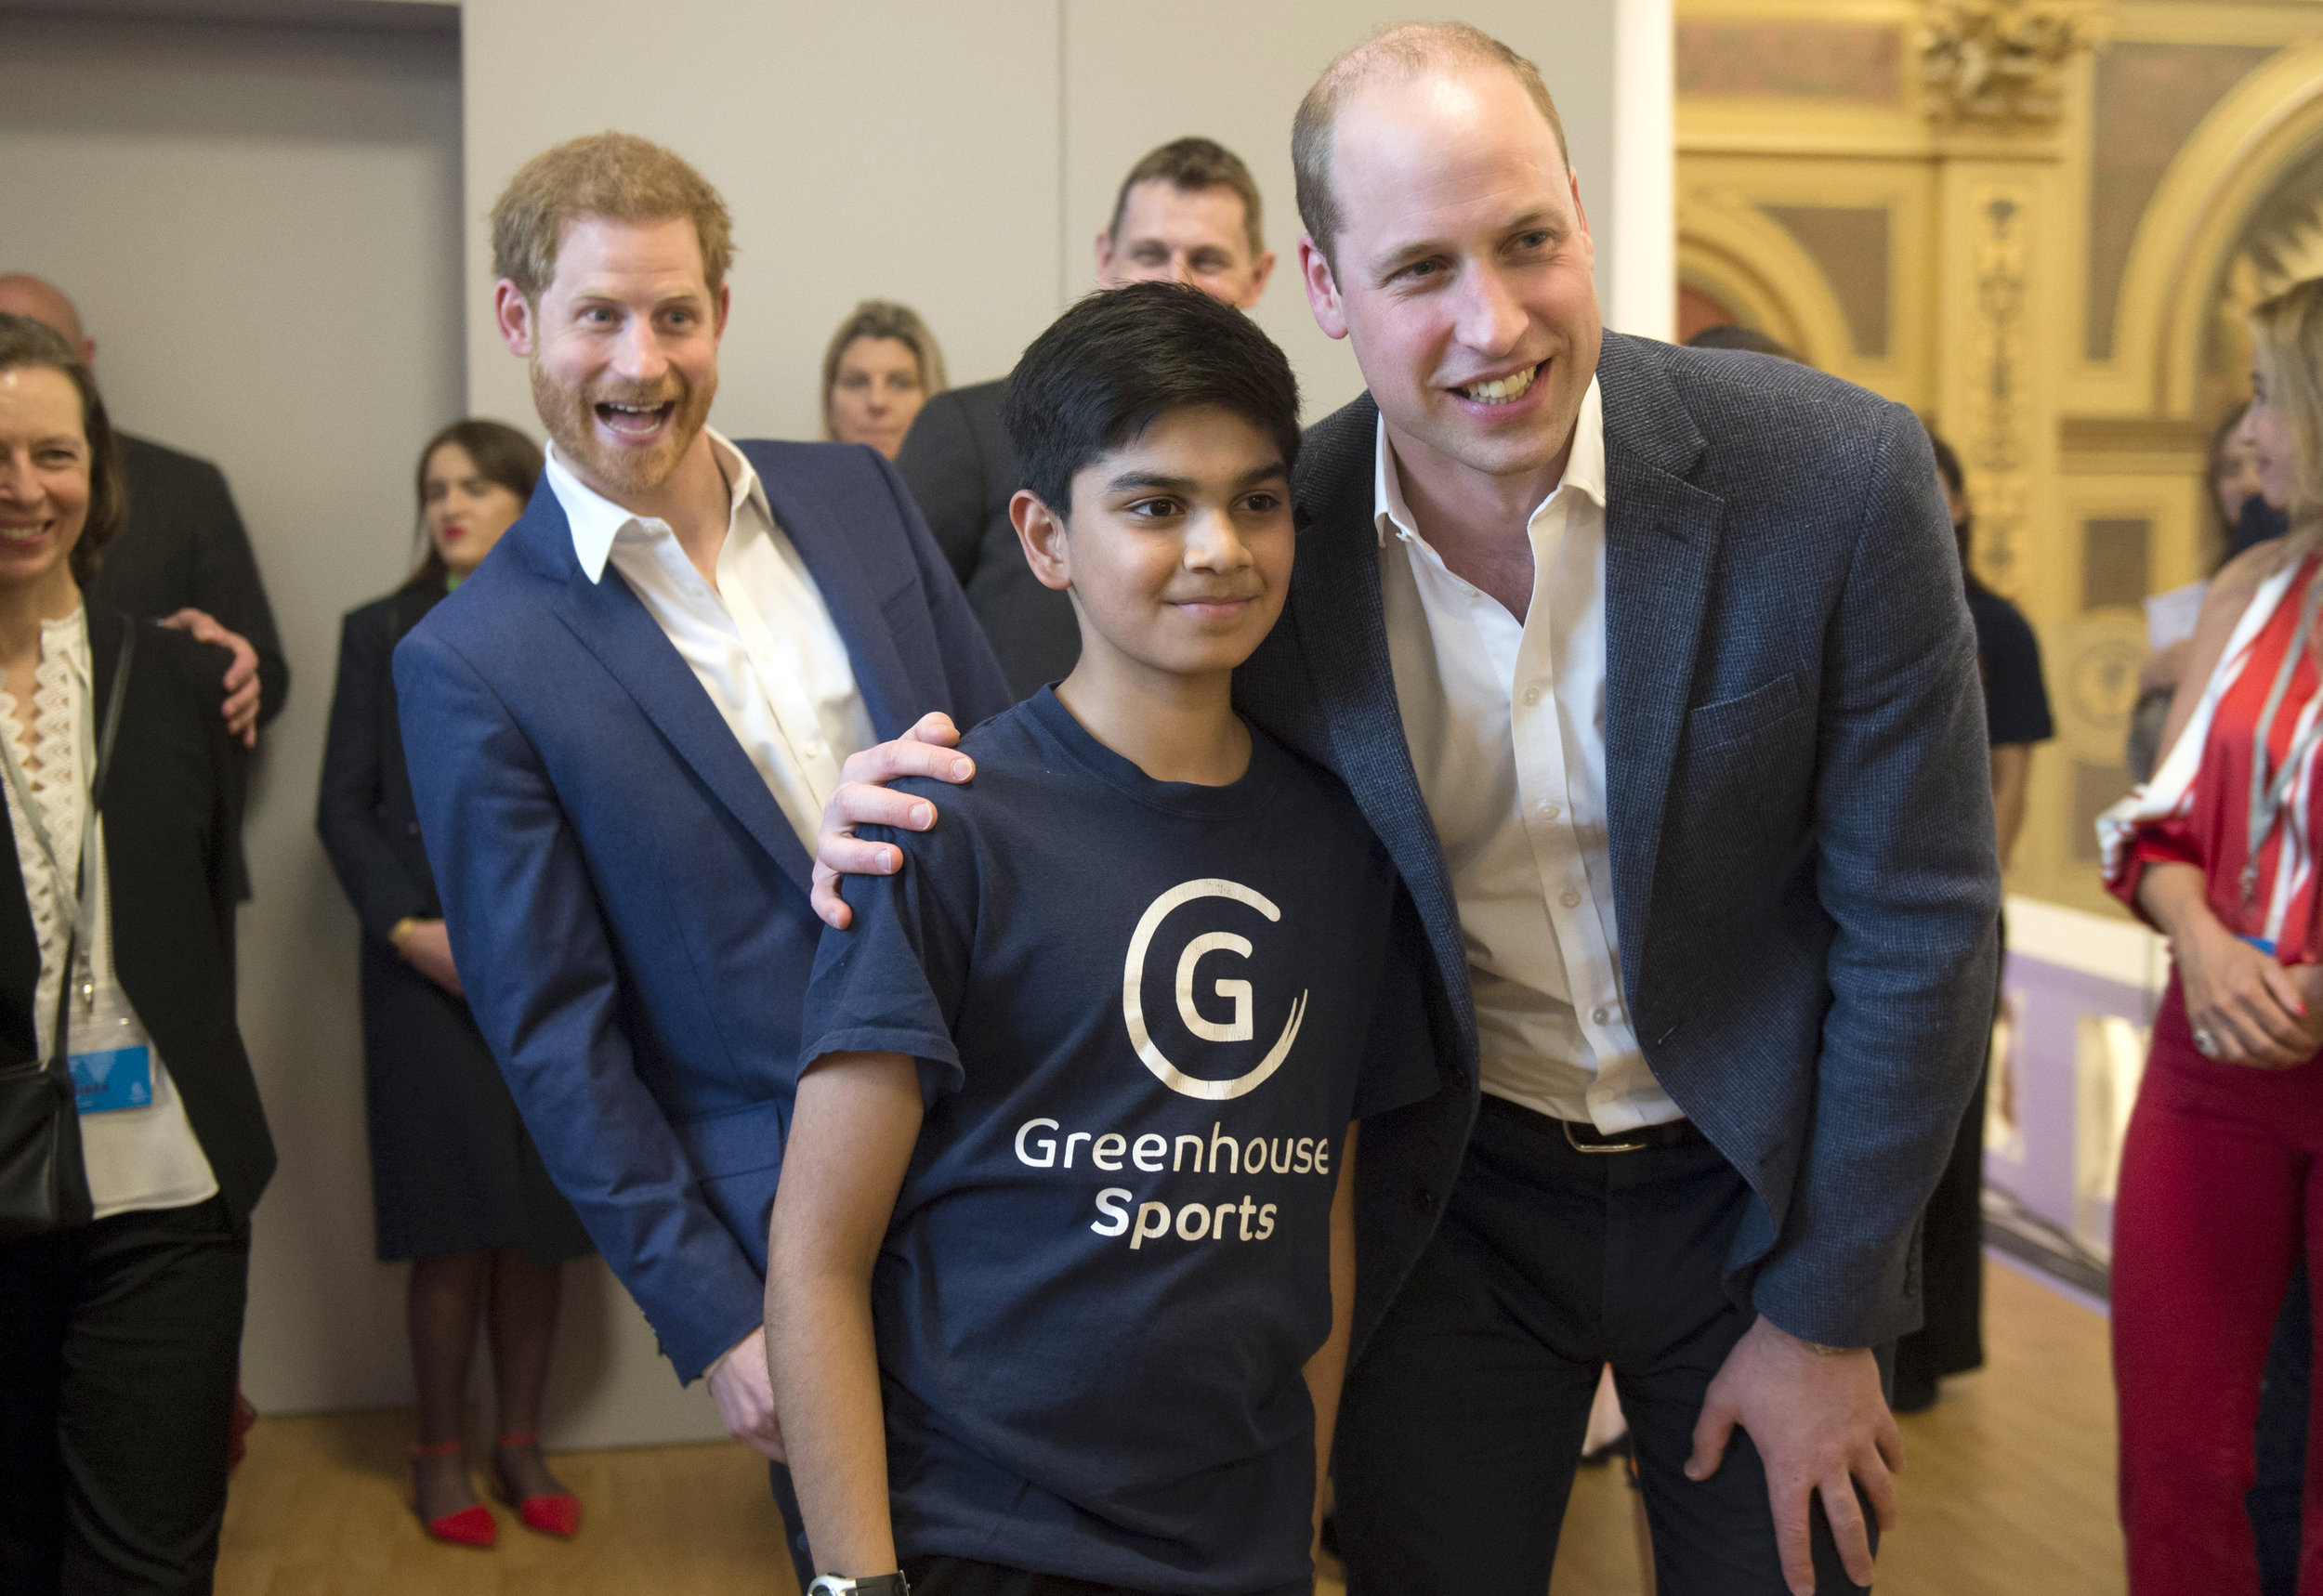  Prince Harry 'photobombs' his brother, Prince William during the opening of the Greenhouse Centre in Marylebone, London.
Photo by Ben Stevens, 26 April 2018
 